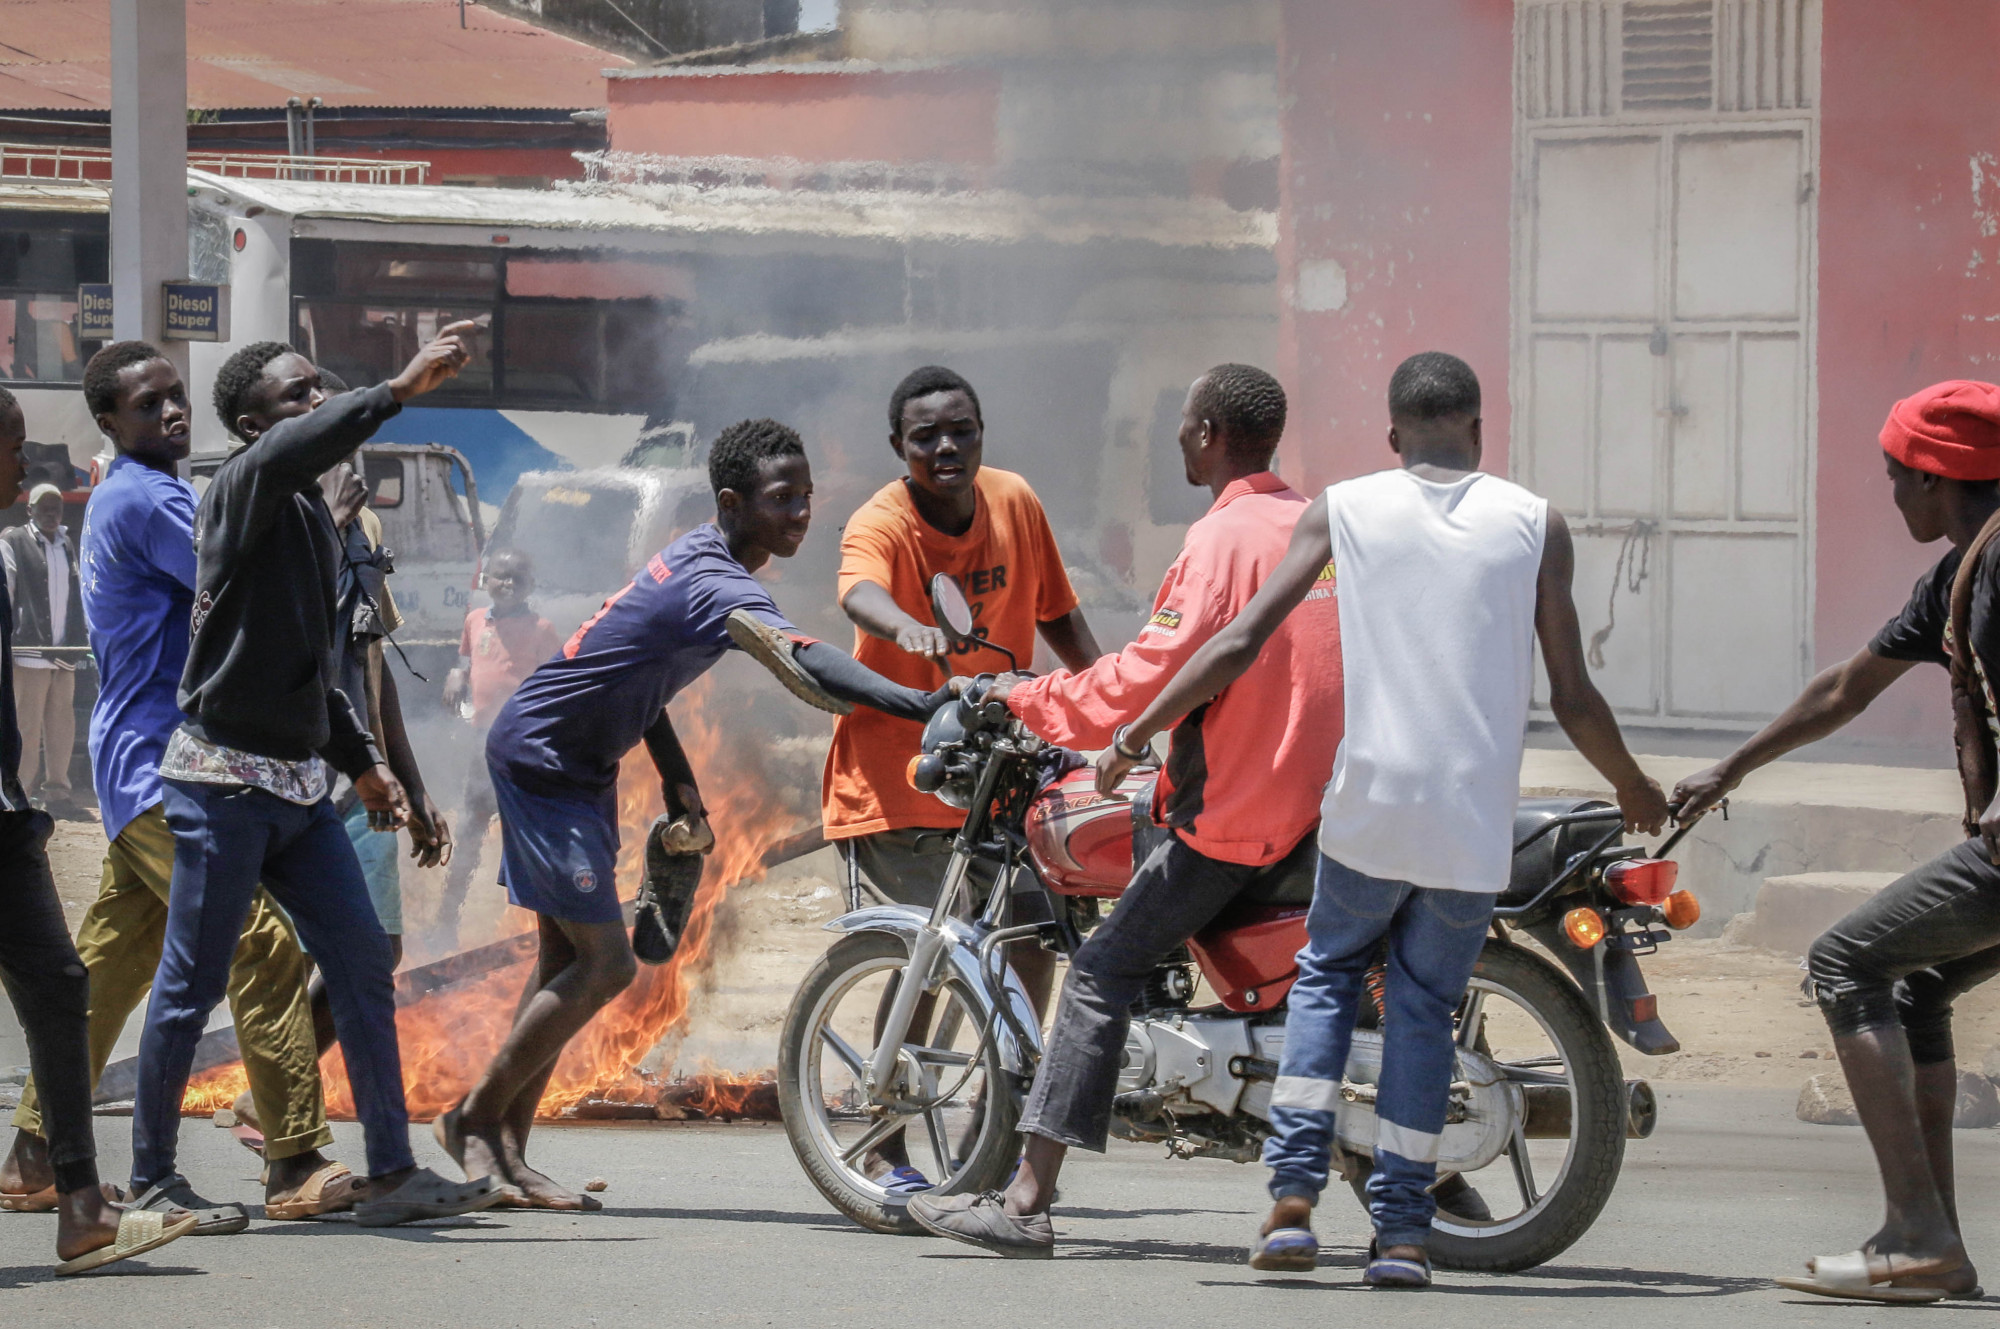 Bunia, DRC, September 4, 2020. Local youth set up a roadblock to after about 100 heavily armed fighters from the CODECO militia entered the eastern Congolese city of Bunia last Friday. © Dieudonné Dirole for Fondation Carmignac